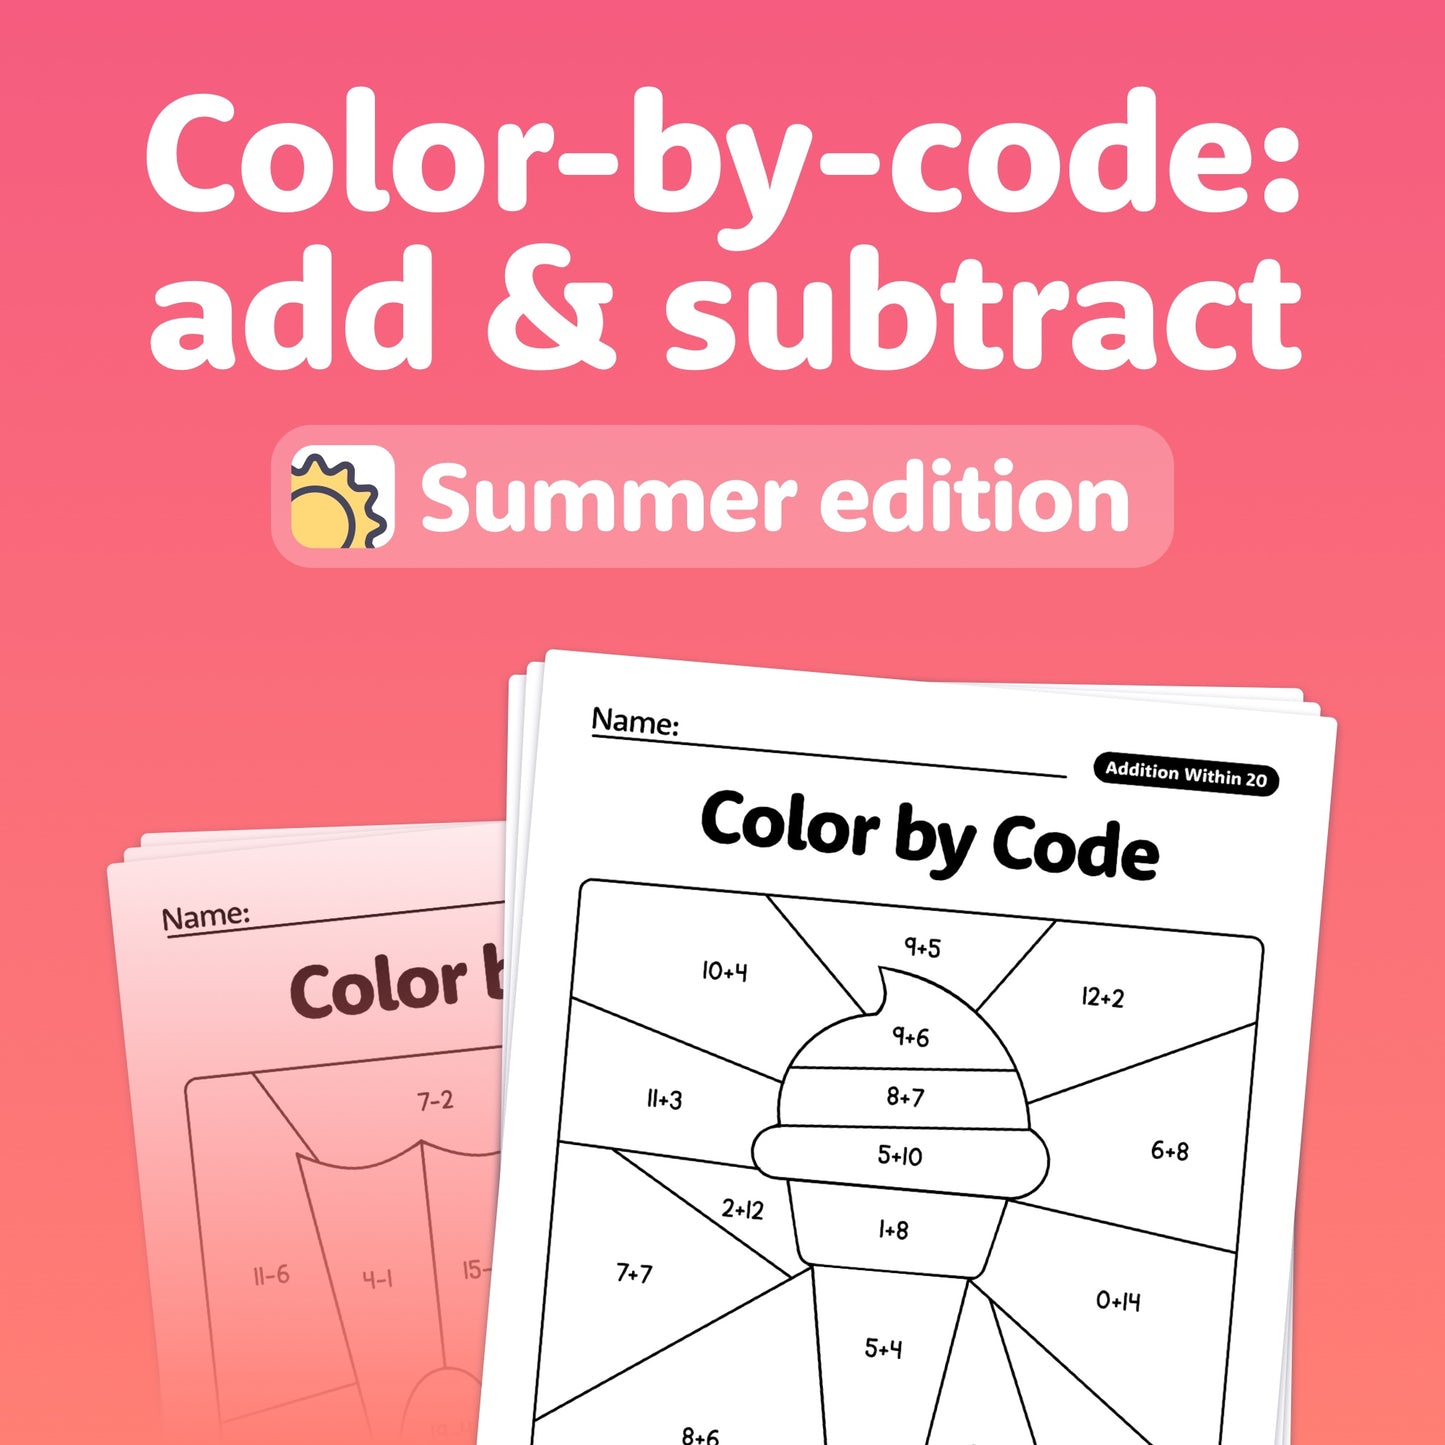 Summer Color-by-Code: Add & Subtract